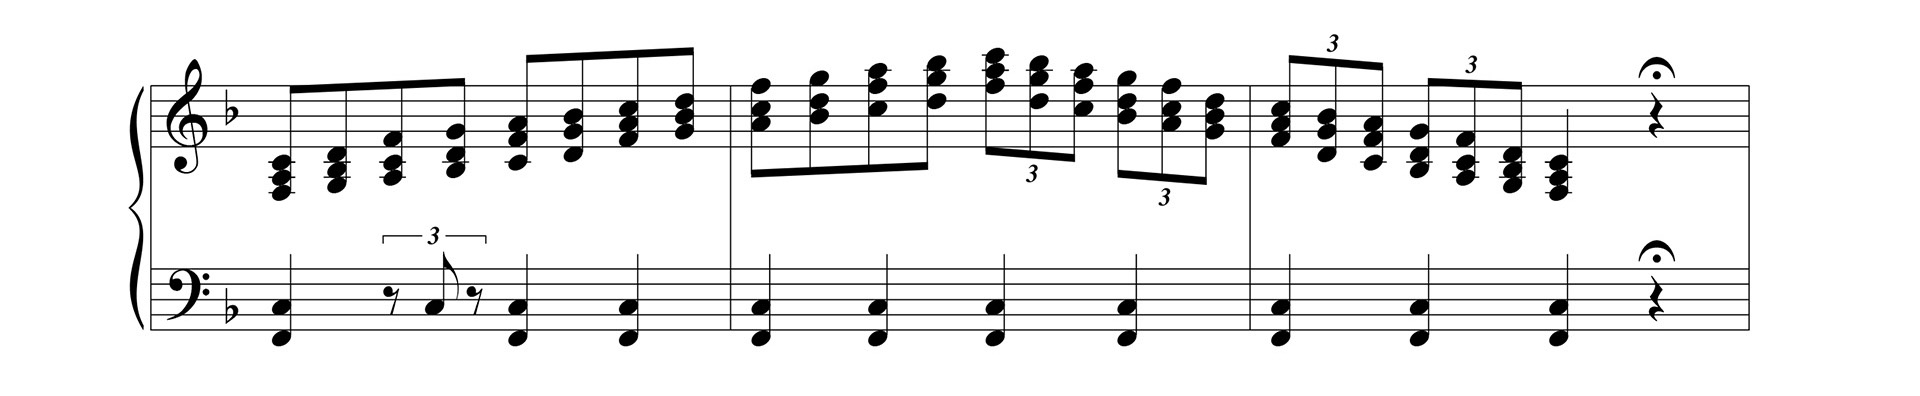 piano chord fills for F chord